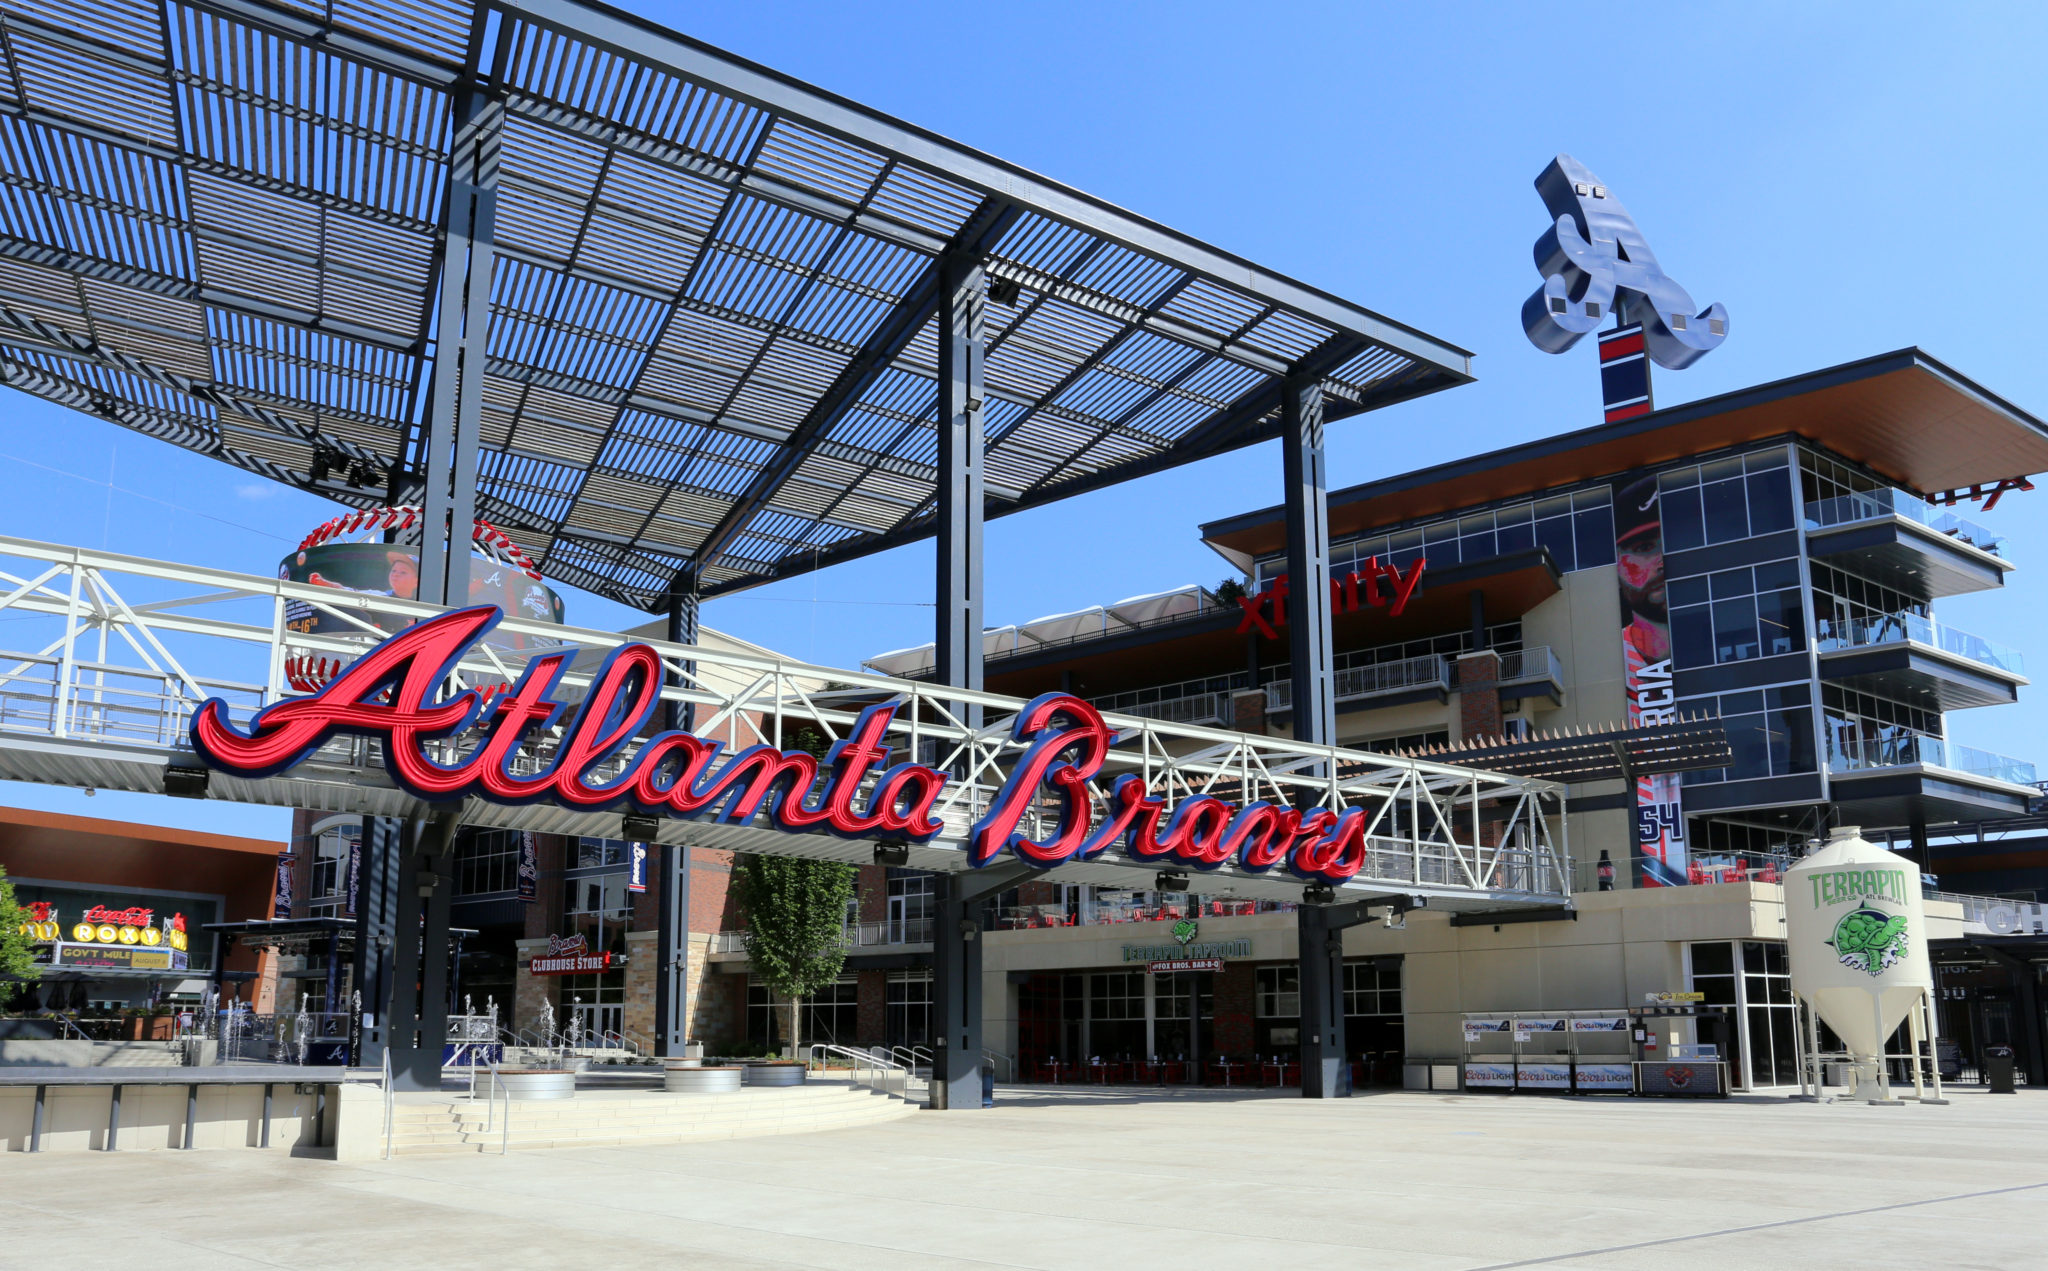 What to Expect When You Attend a Braves Game